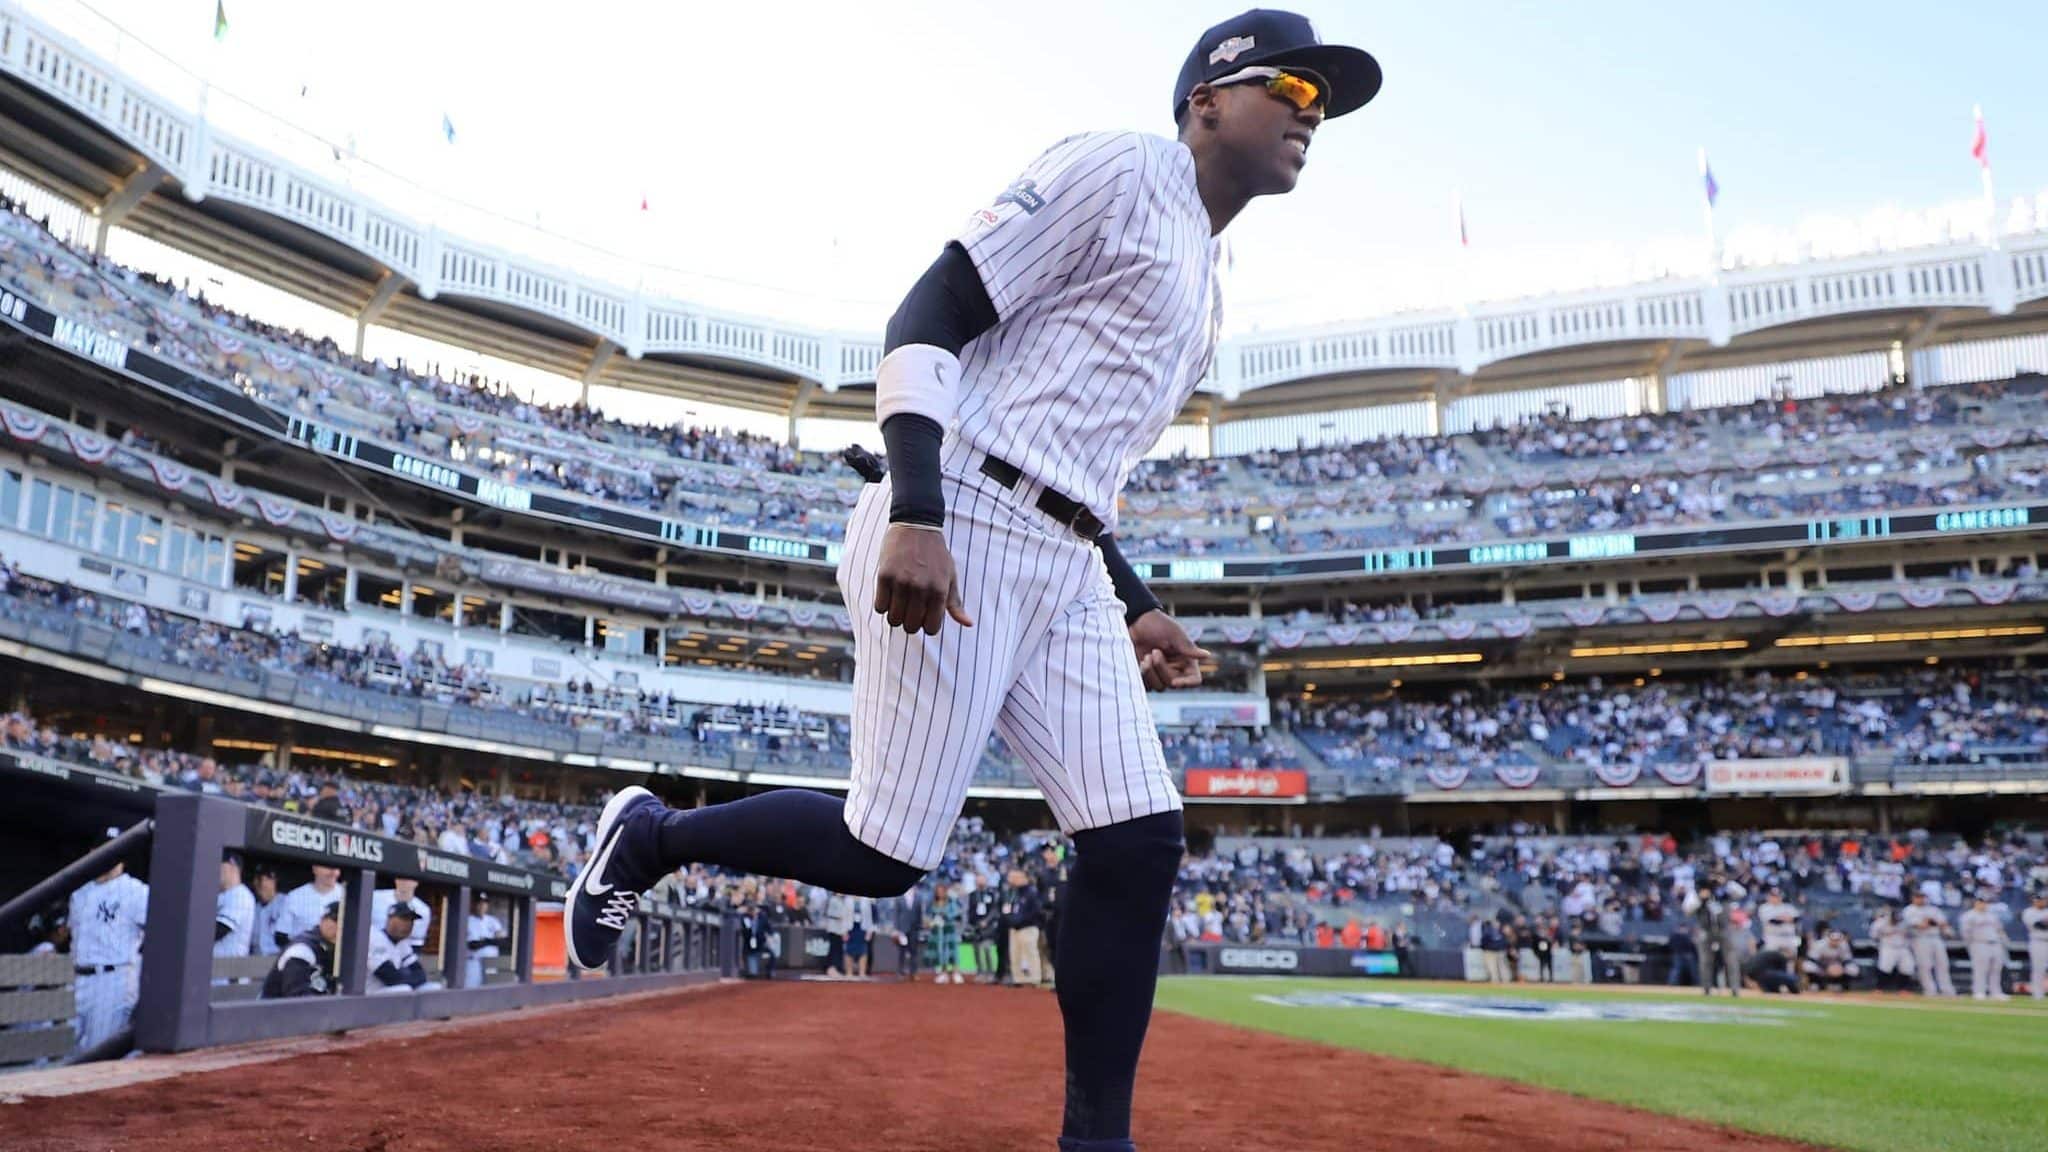 NEW YORK, NEW YORK - OCTOBER 15: Cameron Maybin #38 of the New York Yankees takes the field as he is introduced prior to game three of the American League Championship Series against the Houston Astros at Yankee Stadium on October 15, 2019 in New York City.